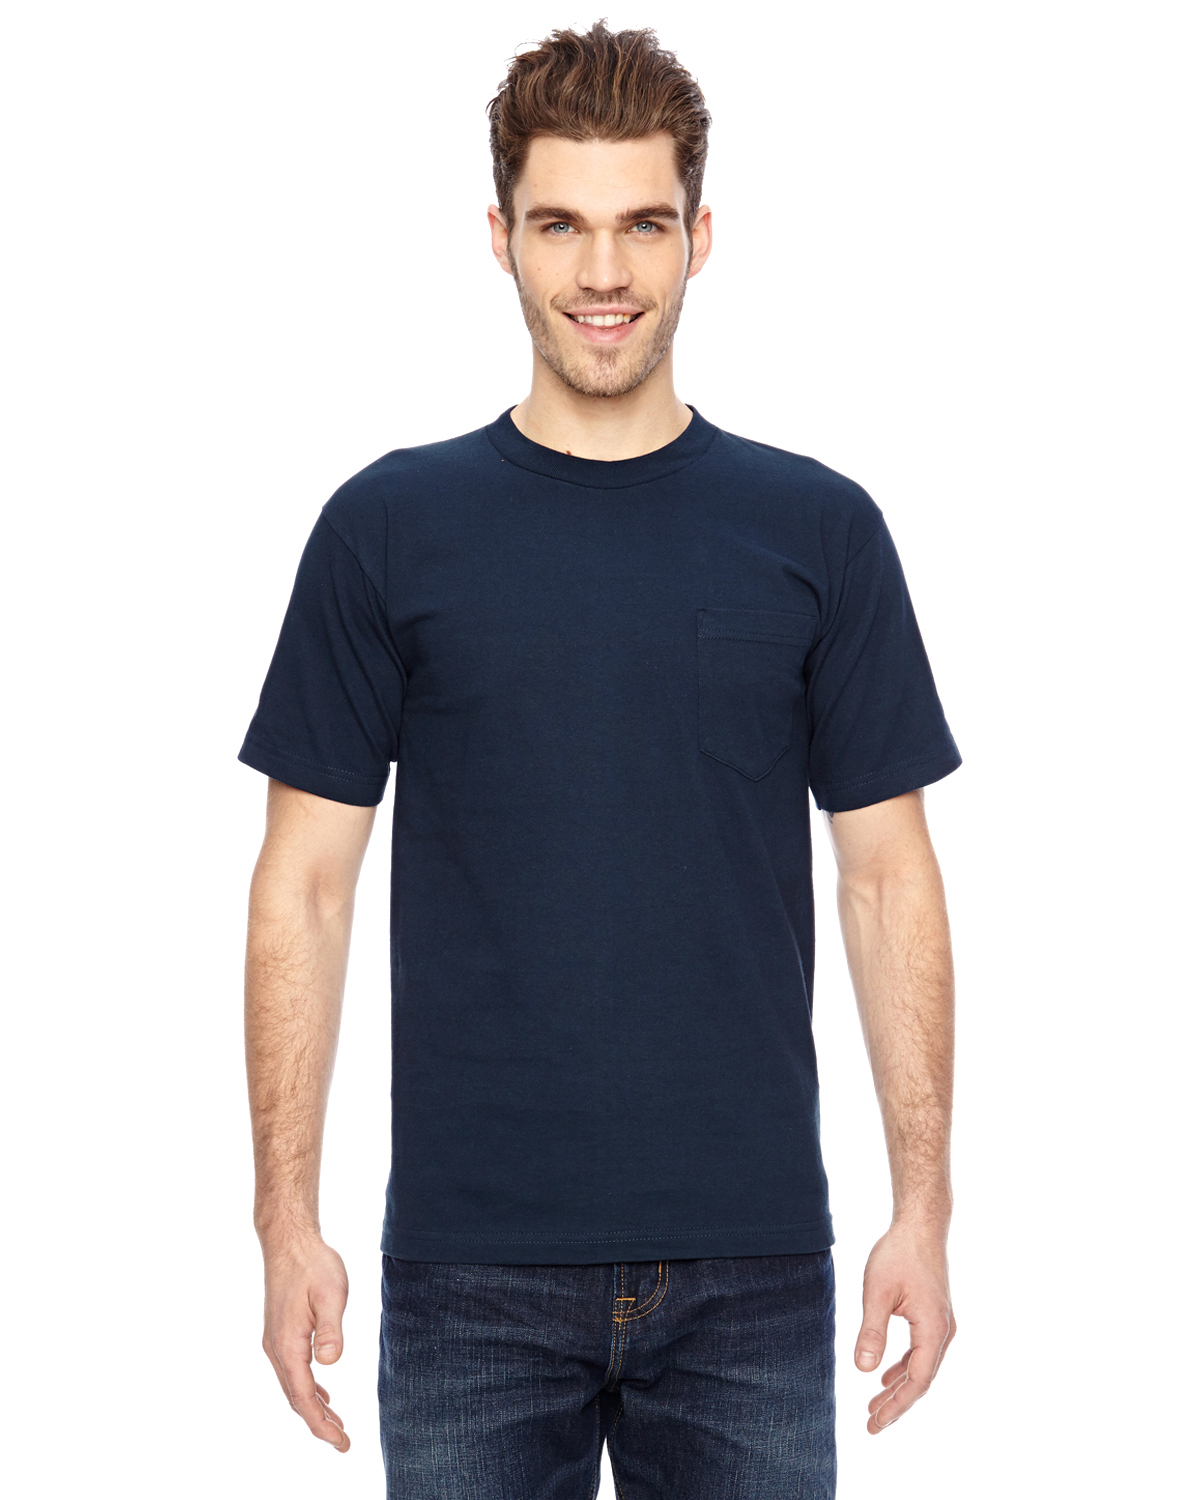 Bayside 7100 Short Sleeve T-Shirt with a Pocket